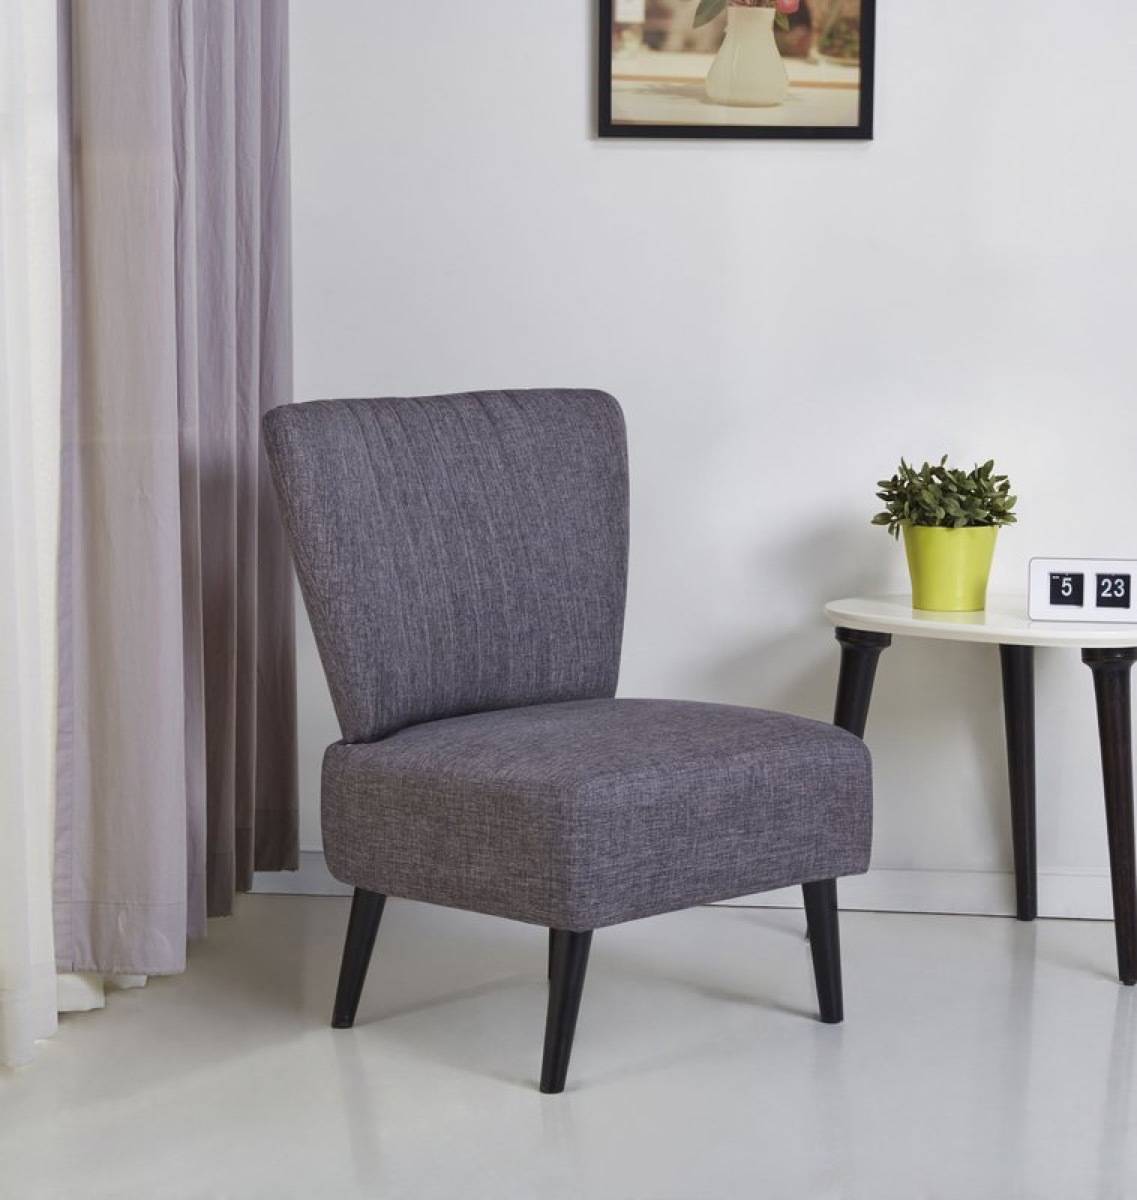 Trent side chair from Wayfair